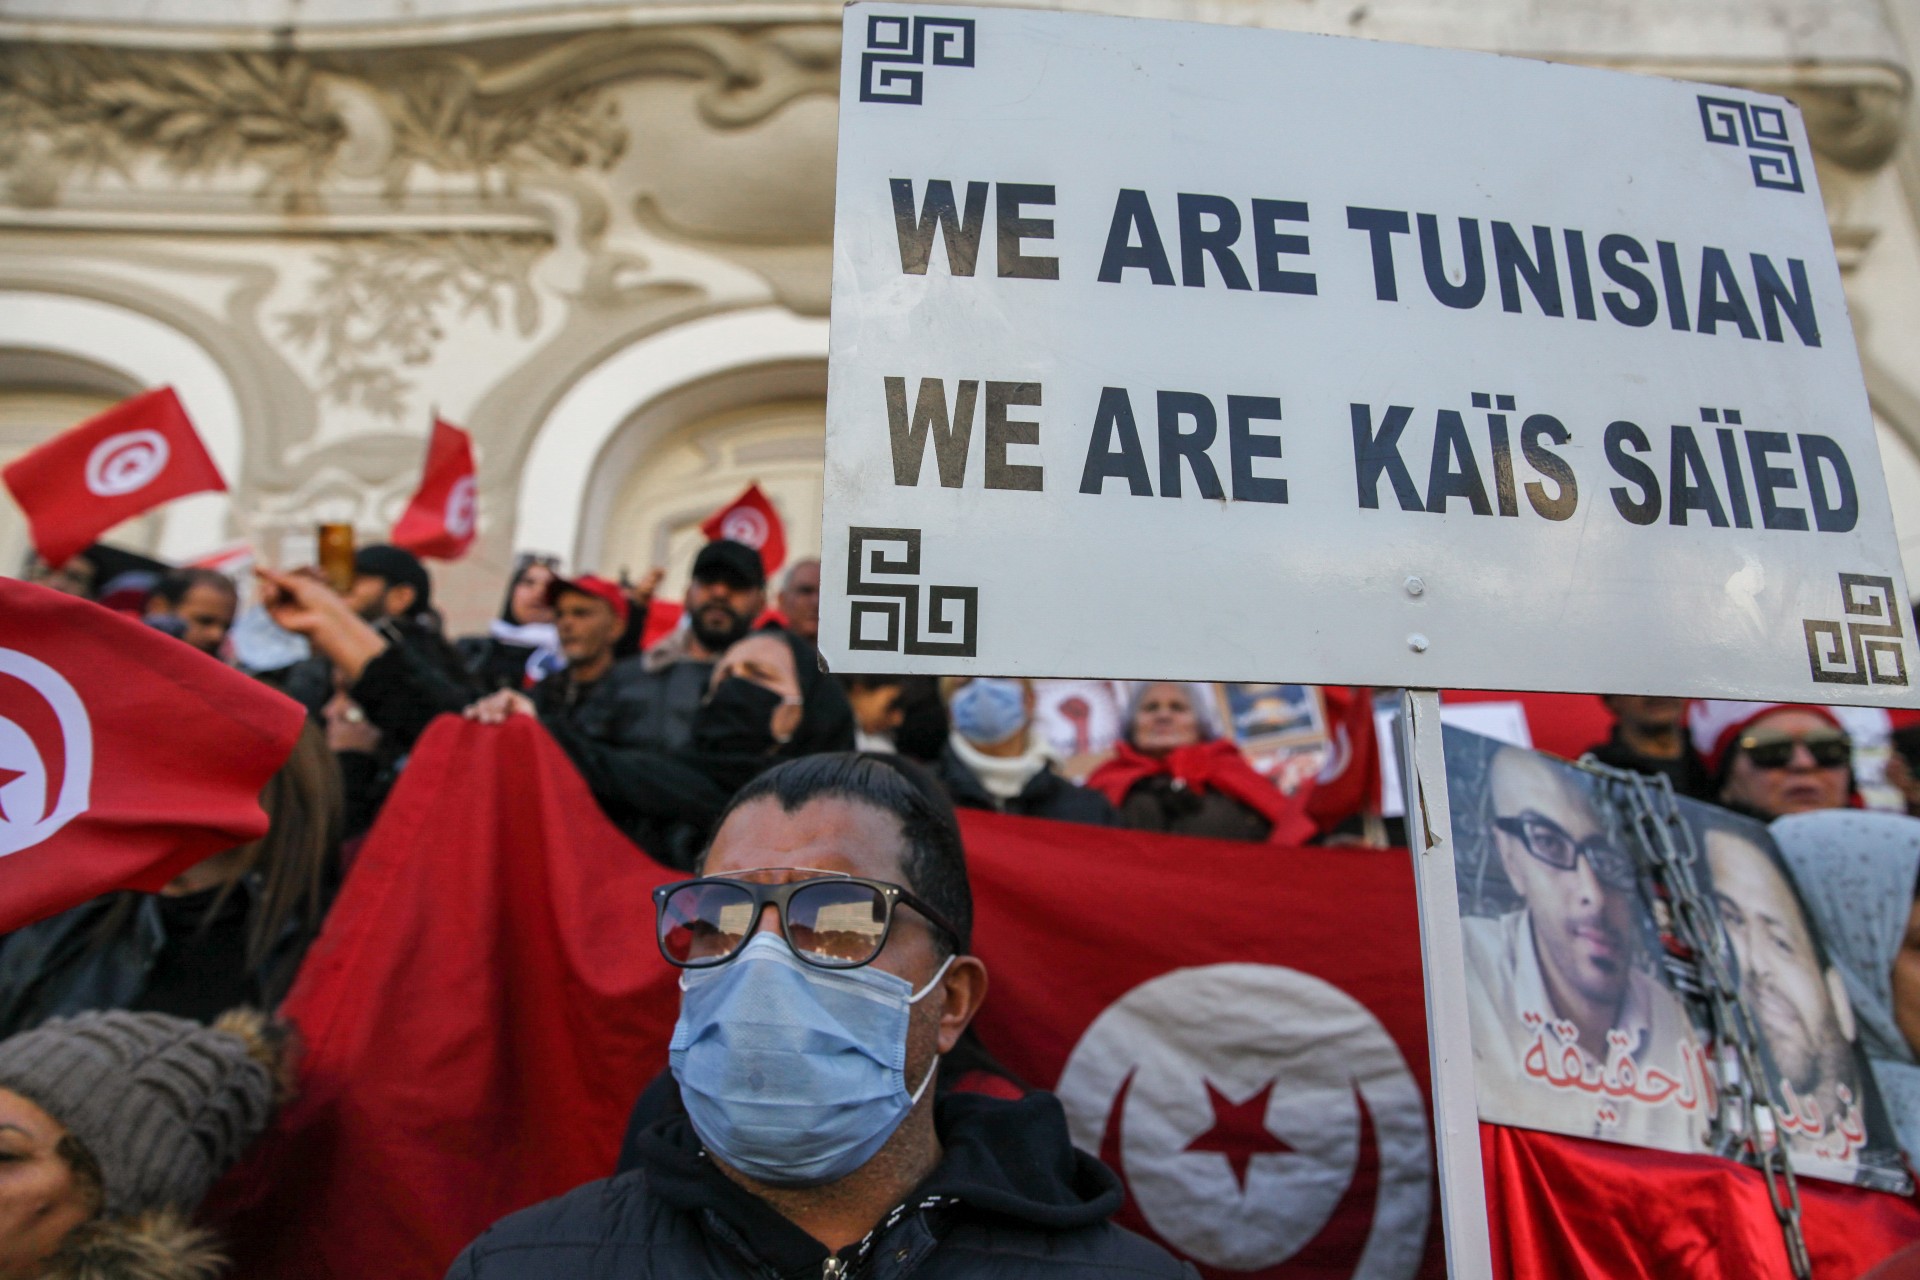 Supporters of President Kais Saied during a demonstration to commemorate the 11th anniversary of the outbreak of the Tunisian revolution and to support the president (Reuters)